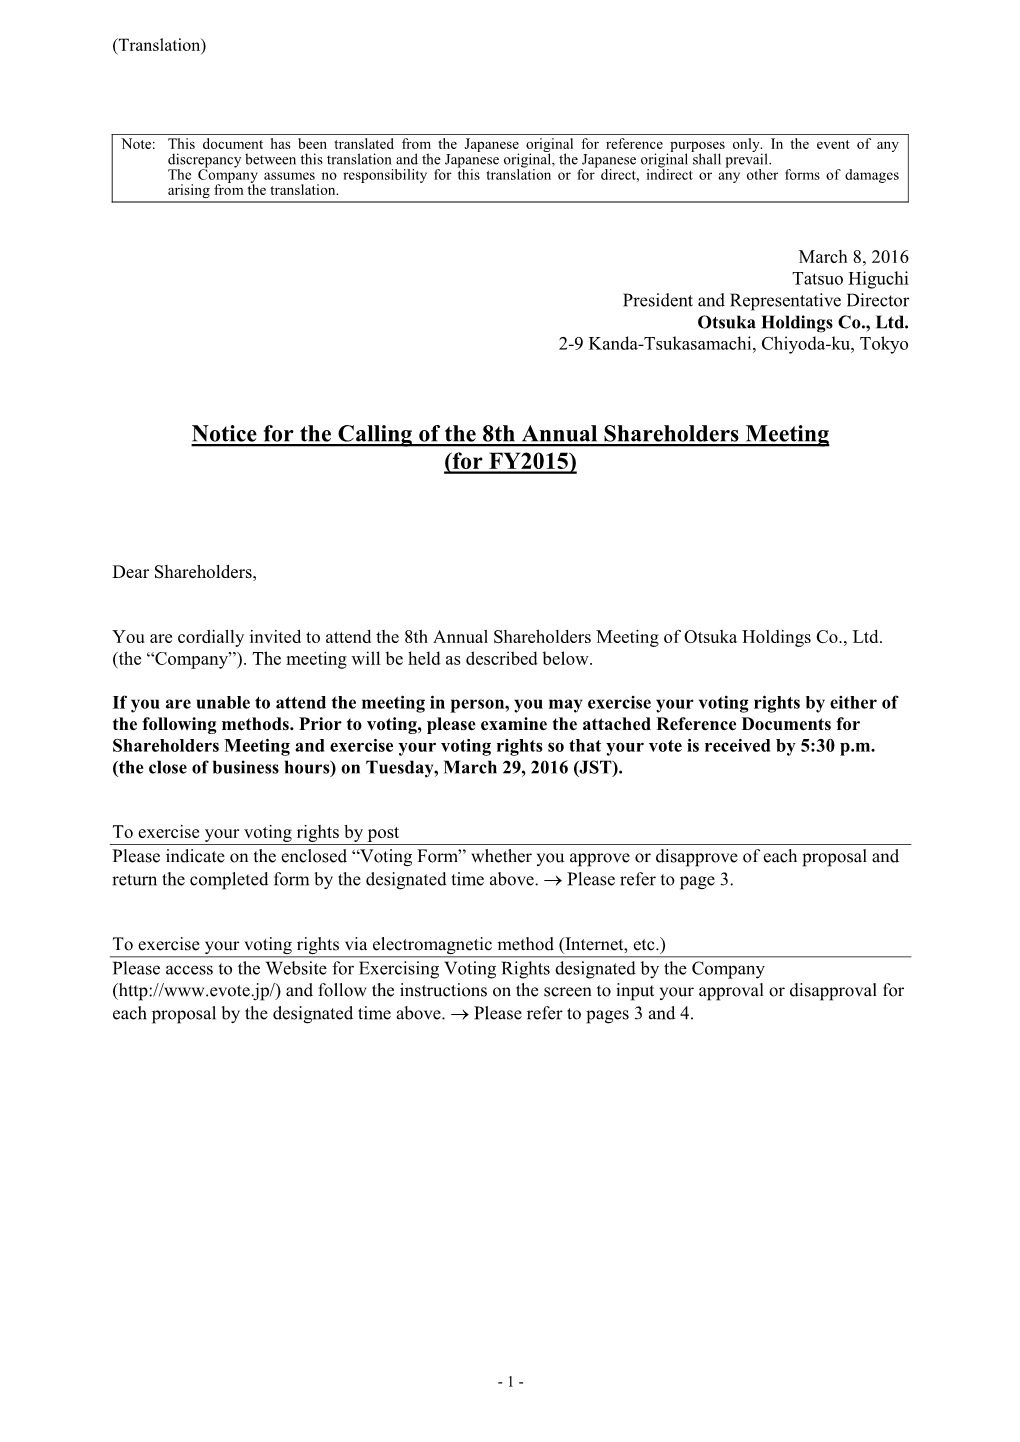 Notice for the Calling of the 8Th Annual Shareholders Meeting (For FY2015)